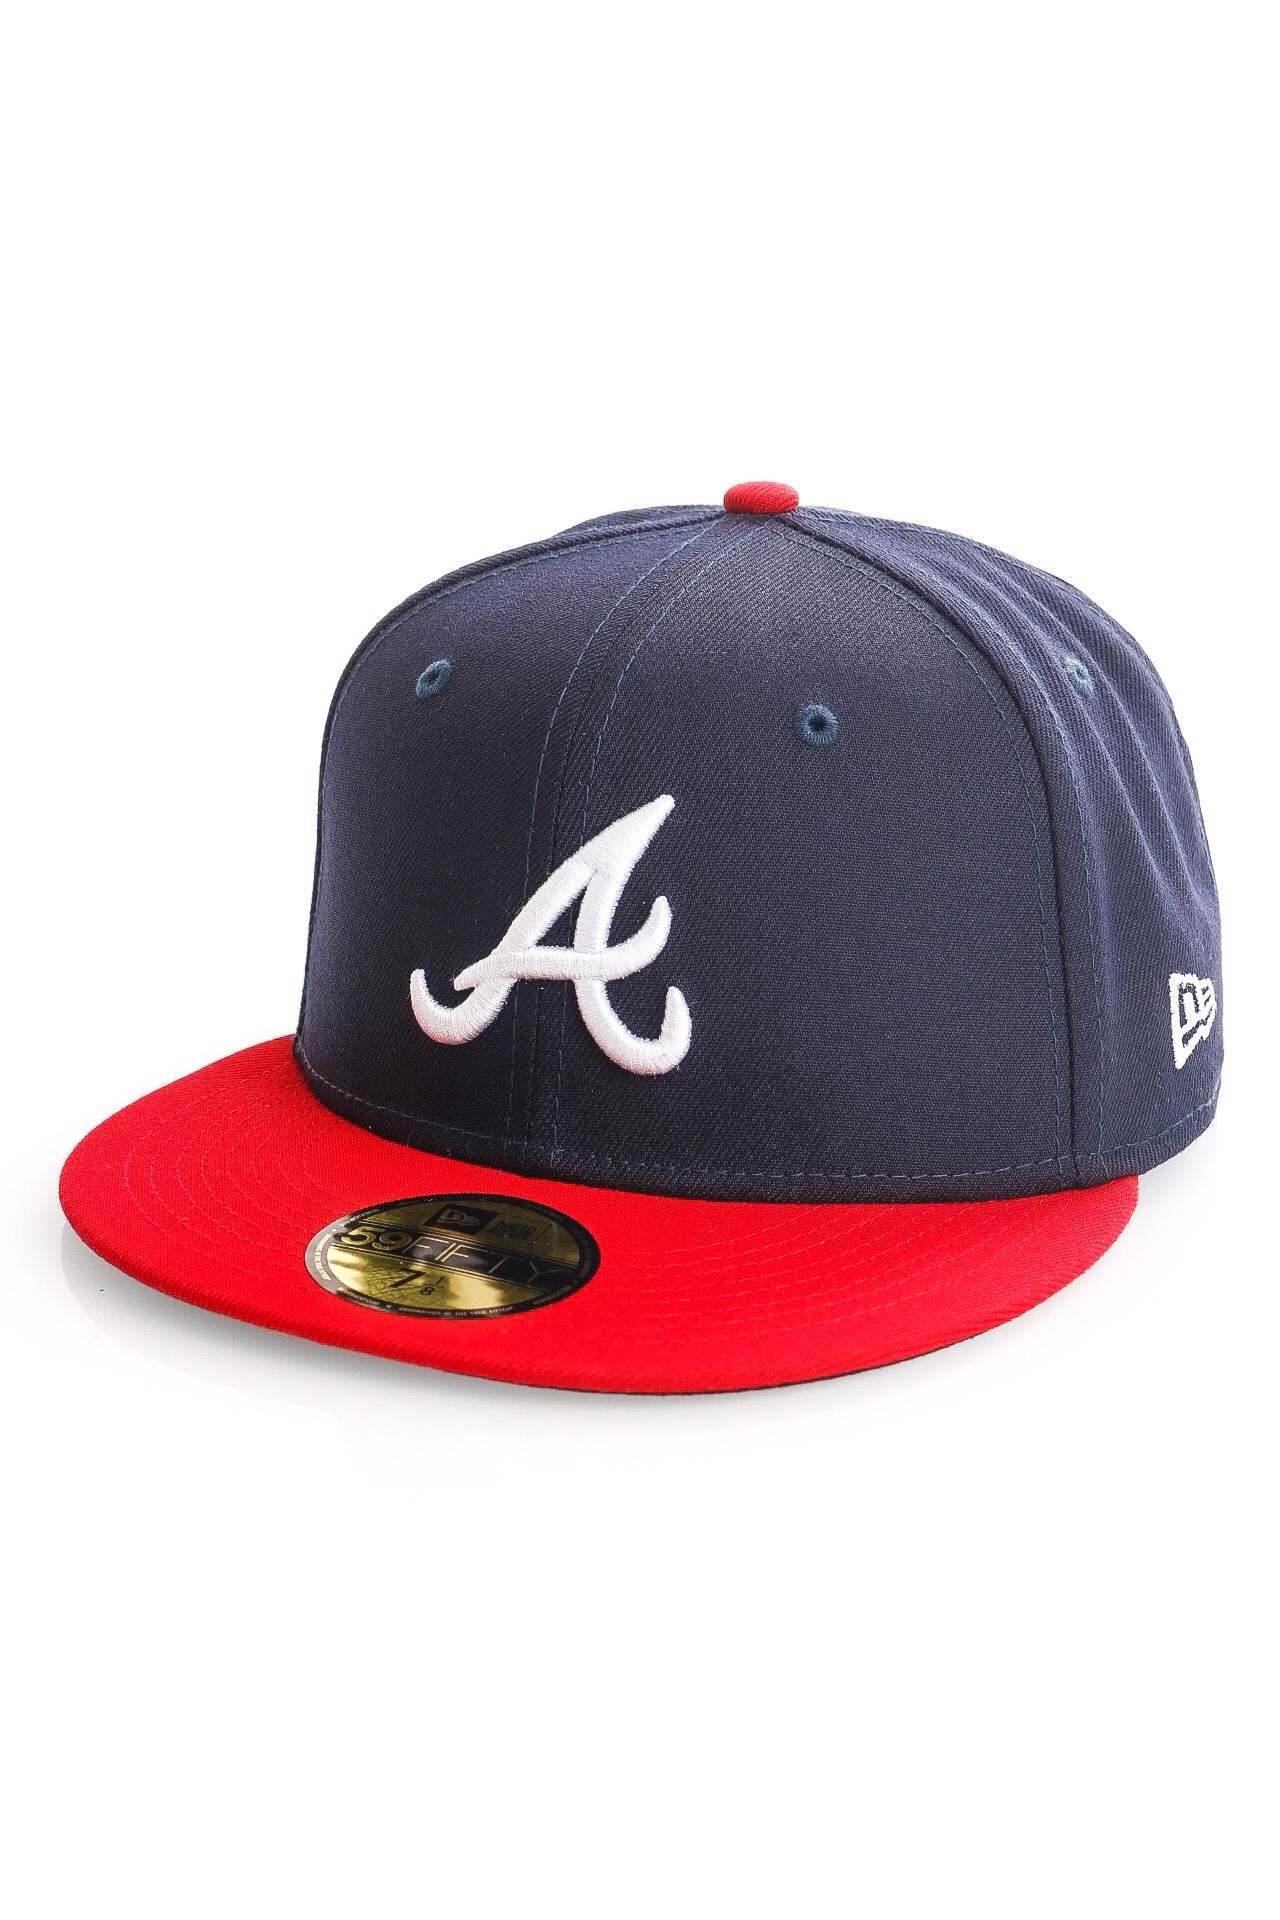 Afbeelding van New Era Atlanta Braves Fitted Cap MLB AC PERF 59FIFTY Navy/White/Red 12572848